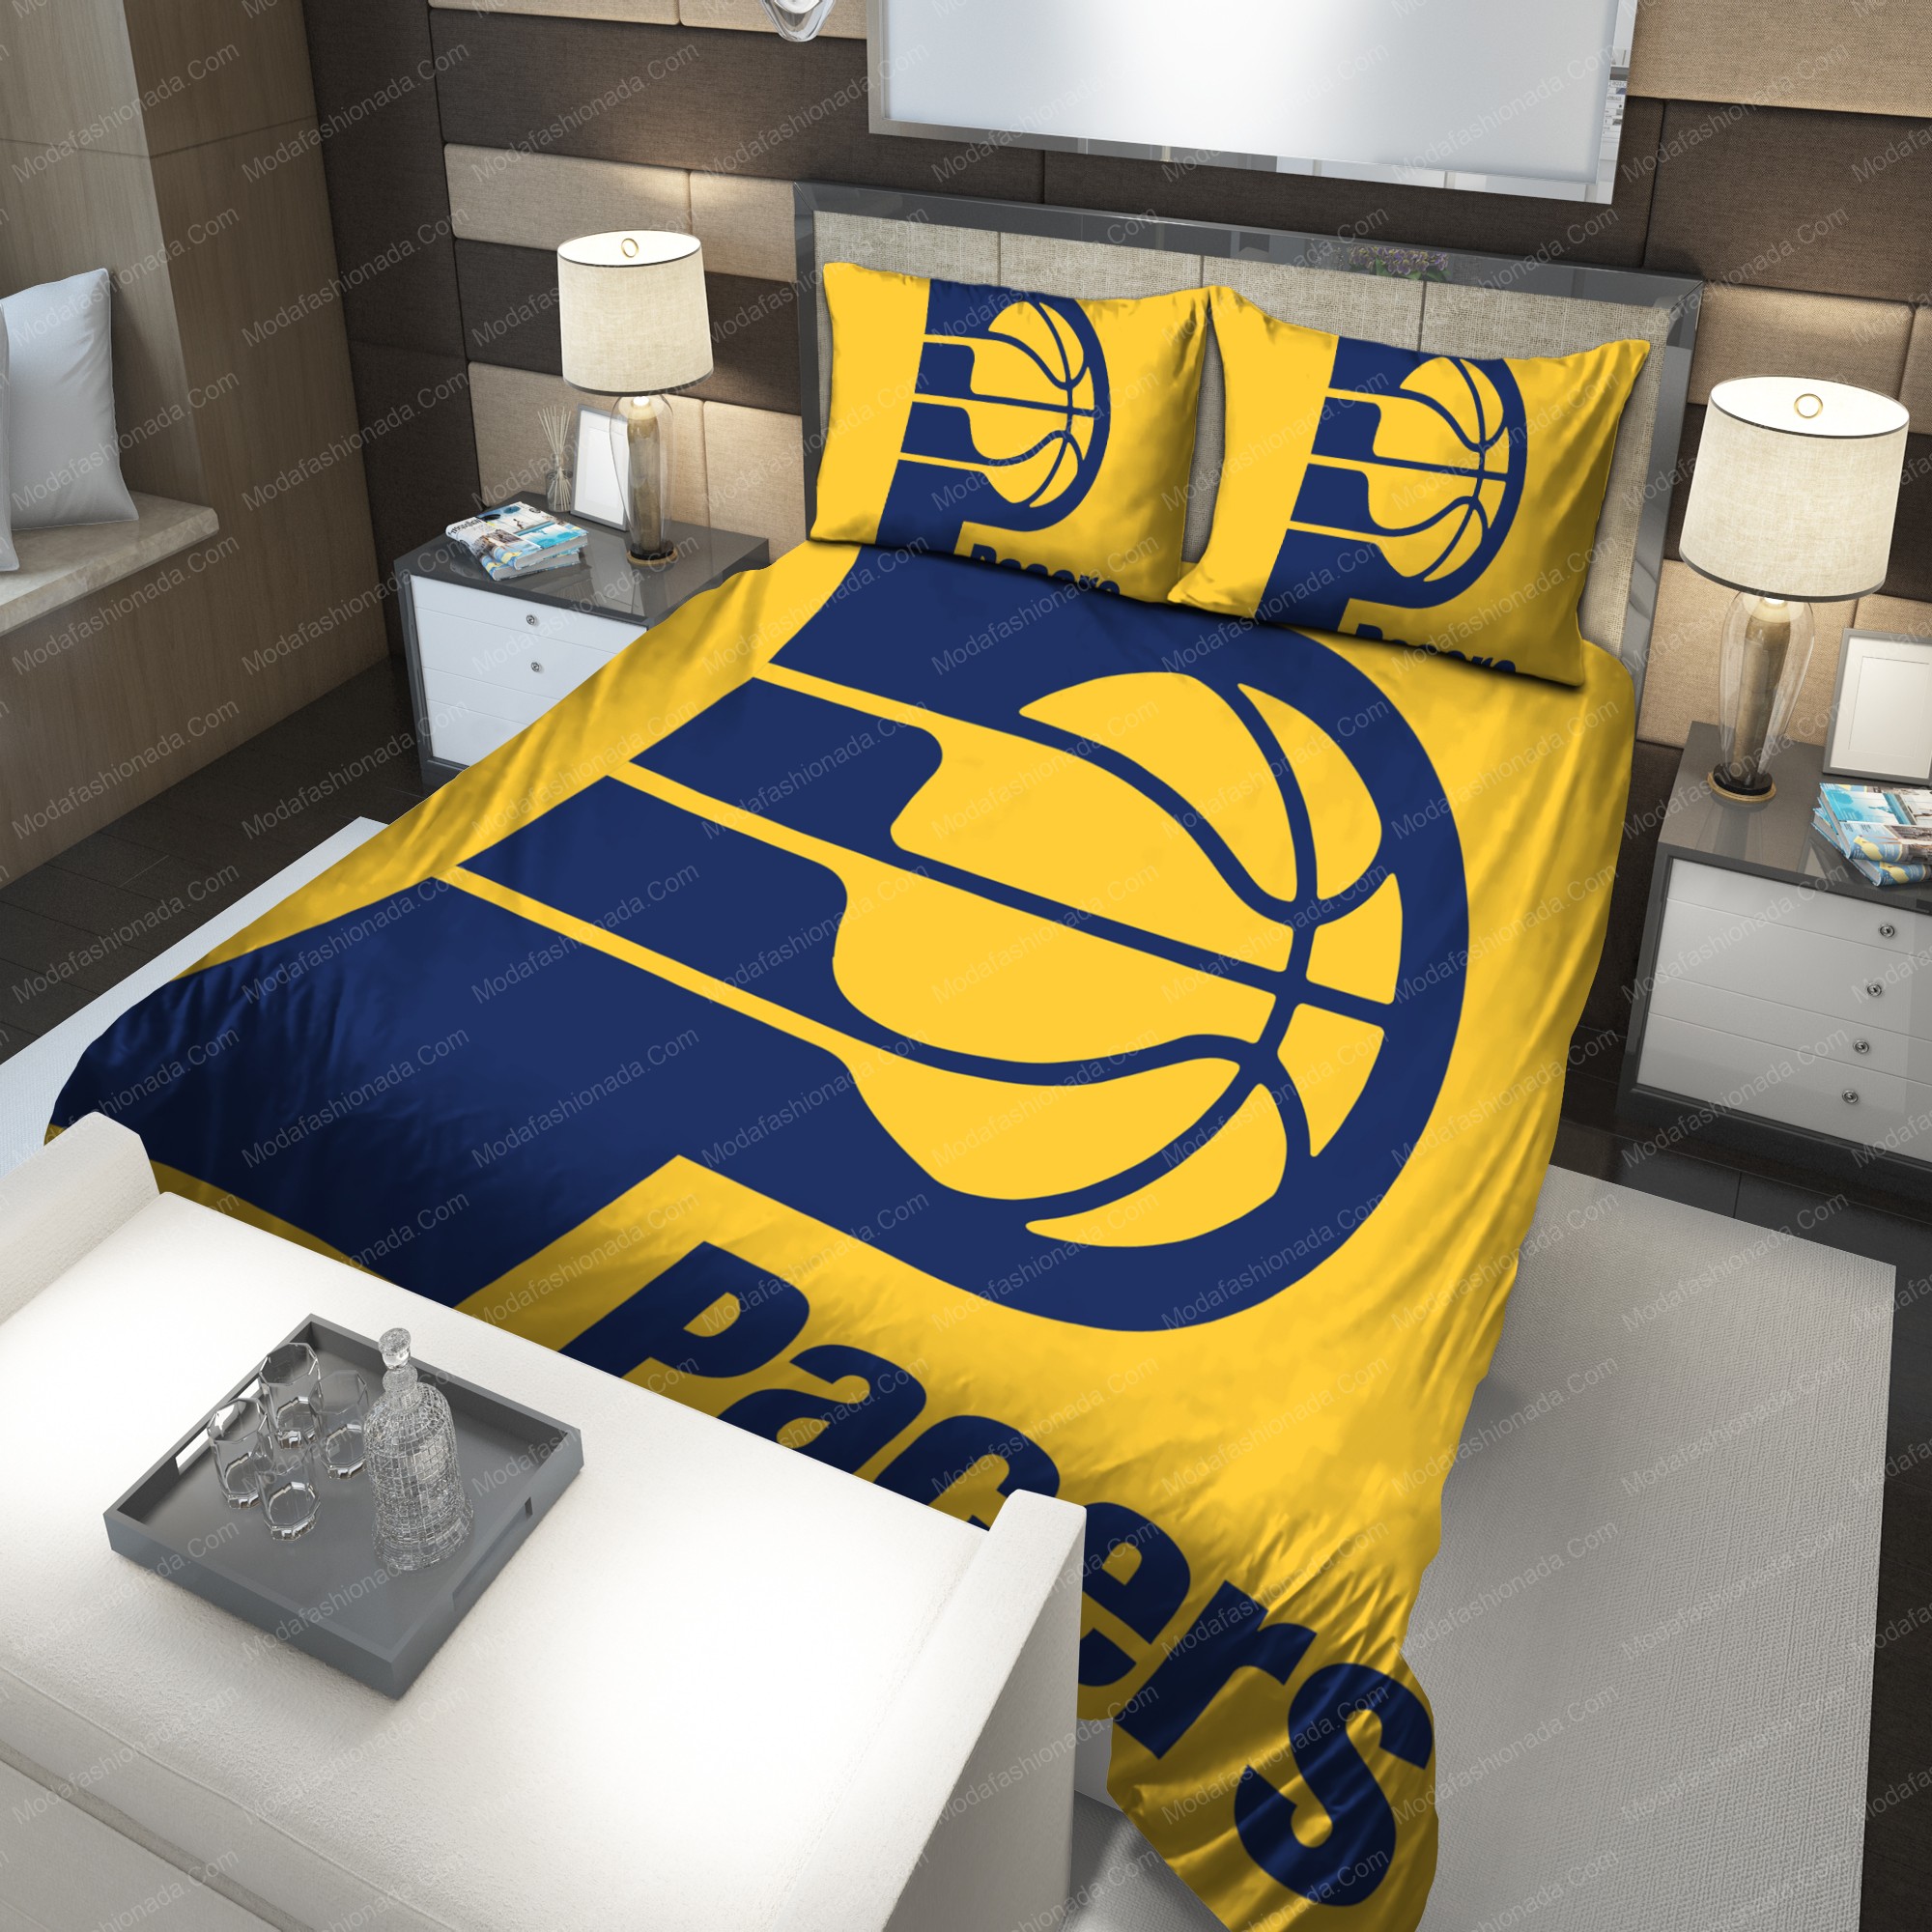 1990-2005 Indiana Pacers Nba 233 Logo Type 1010 Bedding Sets Sporty Bedroom Home Decor